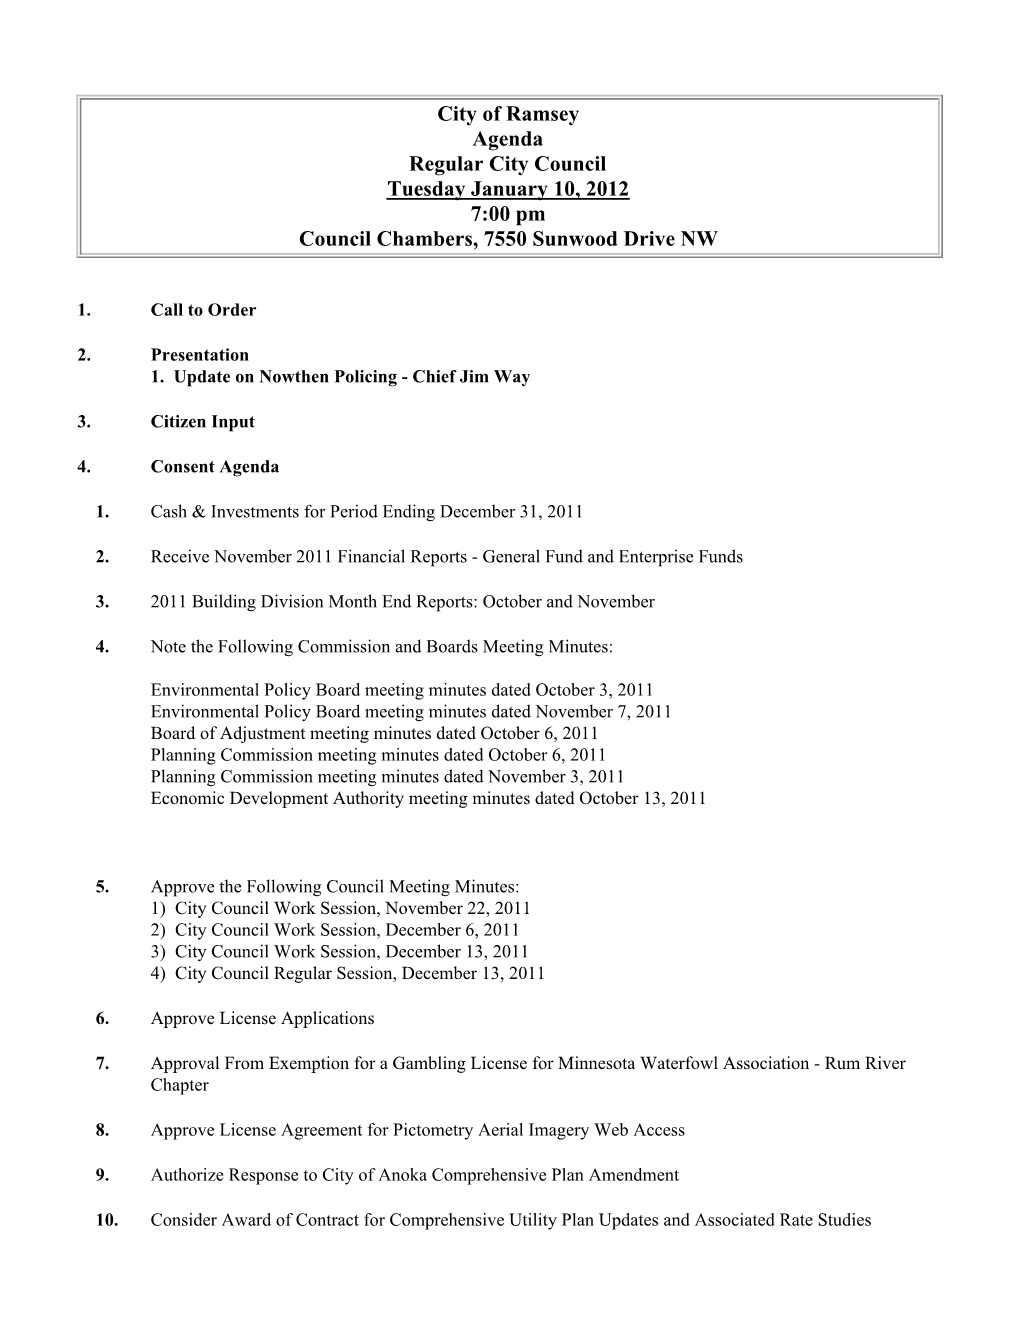 City of Ramsey Agenda Regular City Council Tuesday January 10, 2012 7:00 Pm Council Chambers, 7550 Sunwood Drive NW